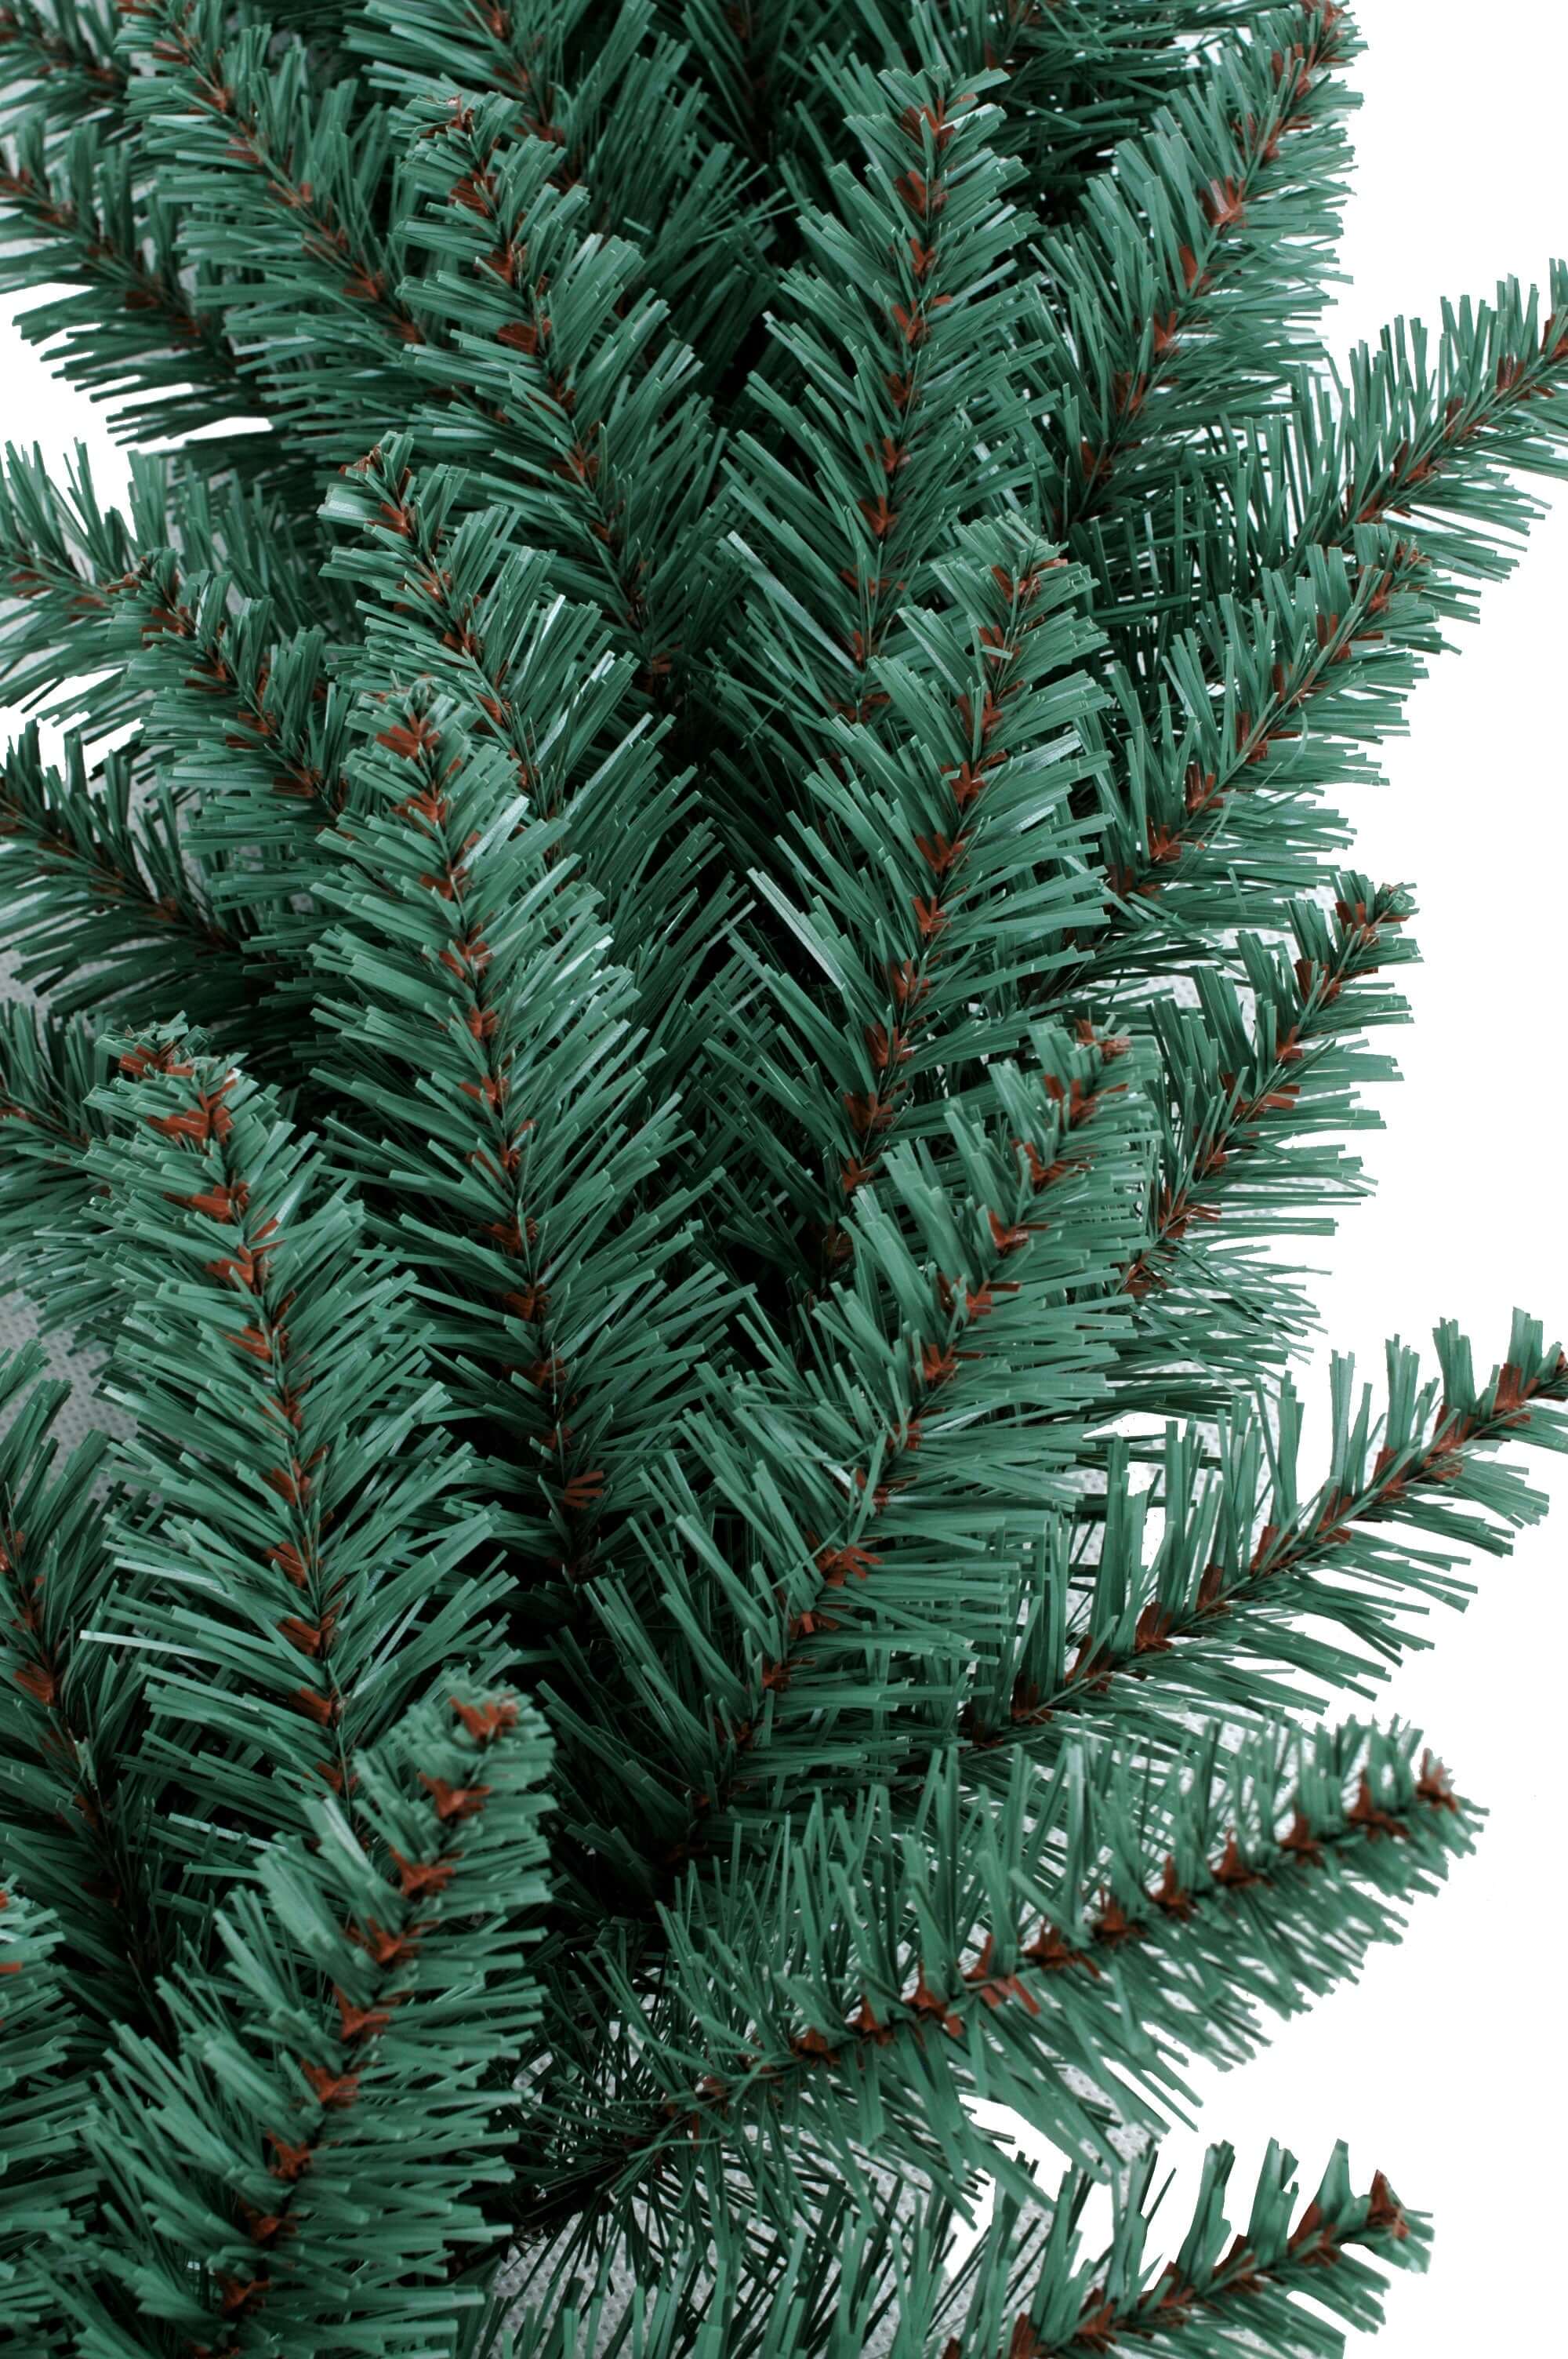 King of Christmas 24" Tribeca Spruce Blue Wreath with Warm White LED Lights (Battery Operated)